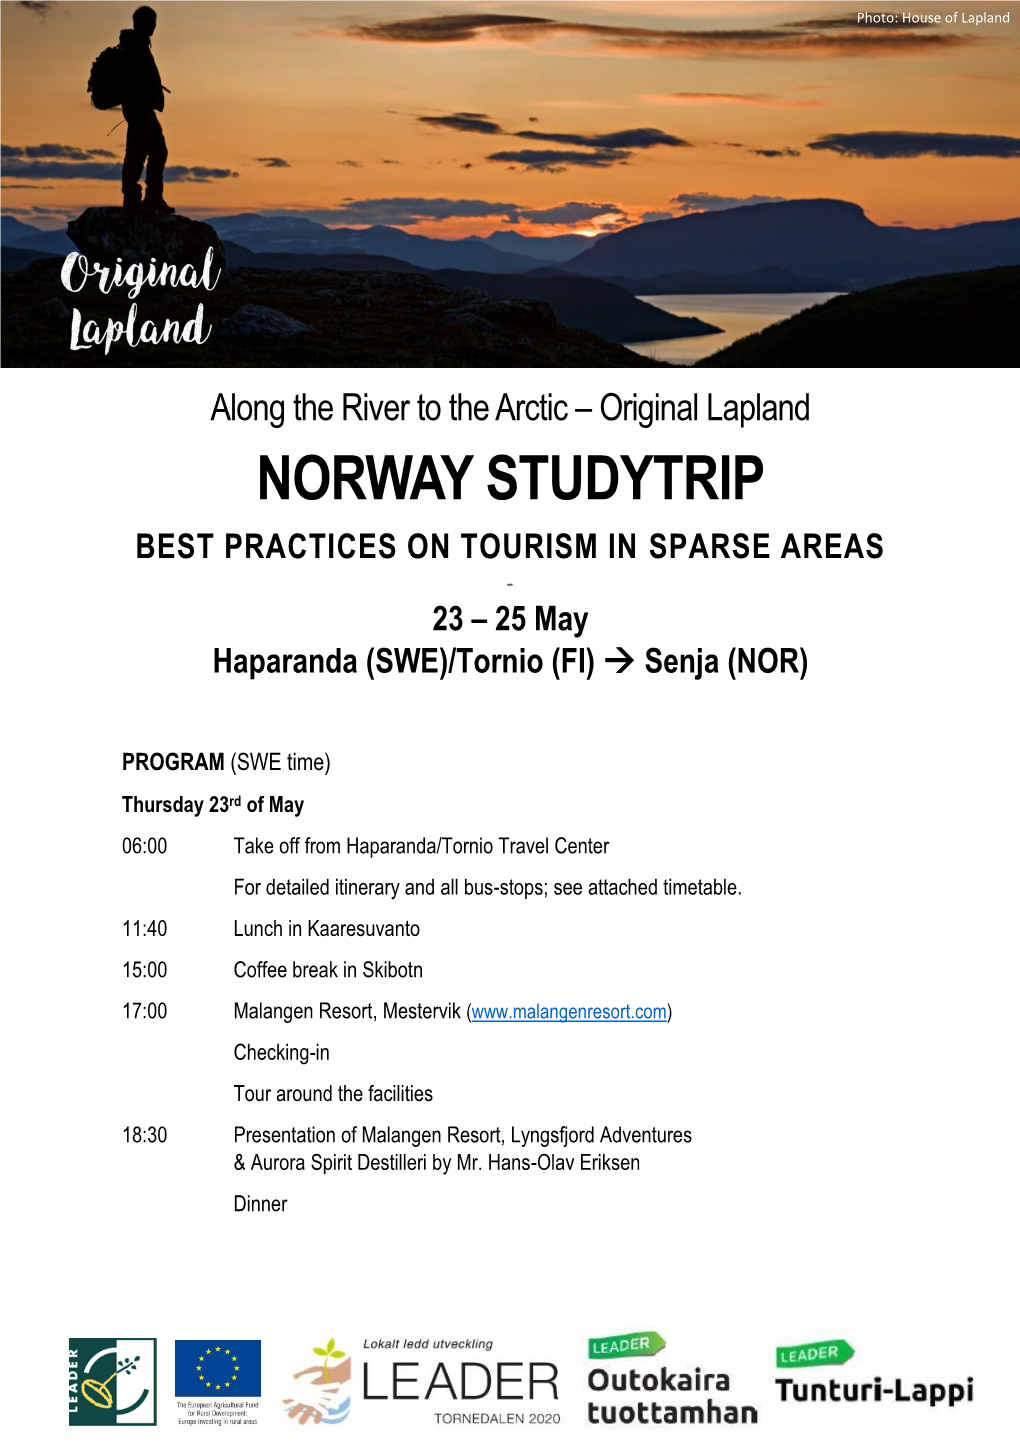 NORWAY STUDYTRIP BEST PRACTICES on TOURISM in SPARSE AREAS - 23 – 25 May Haparanda (SWE)/Tornio (FI) → Senja (NOR)